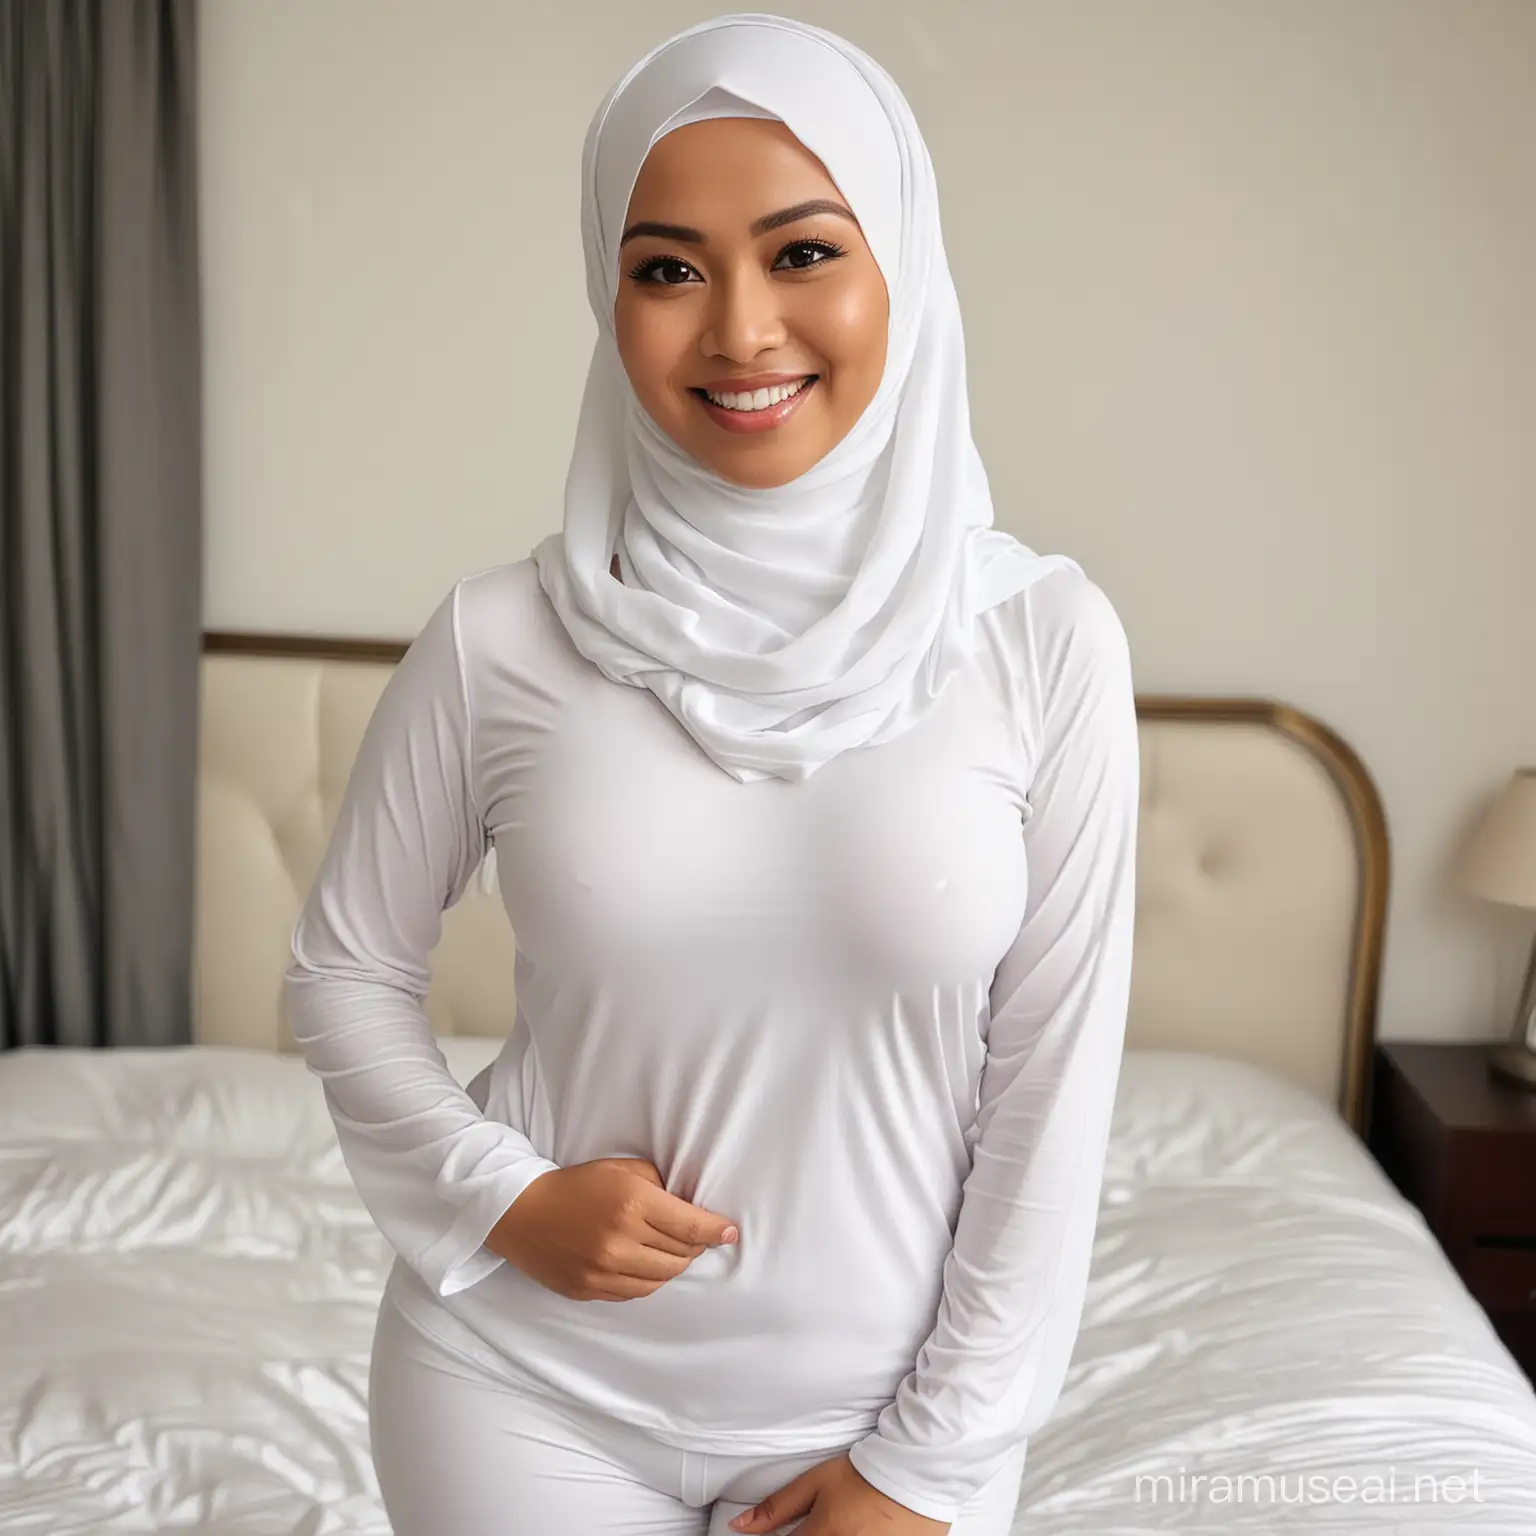 Malaysian Malay lady, aged 39, has very nice body shape, show off her big breast, wearing white tight pyjamas and hijab, smiling. Posing and look directly to the camera. Show full body image. 